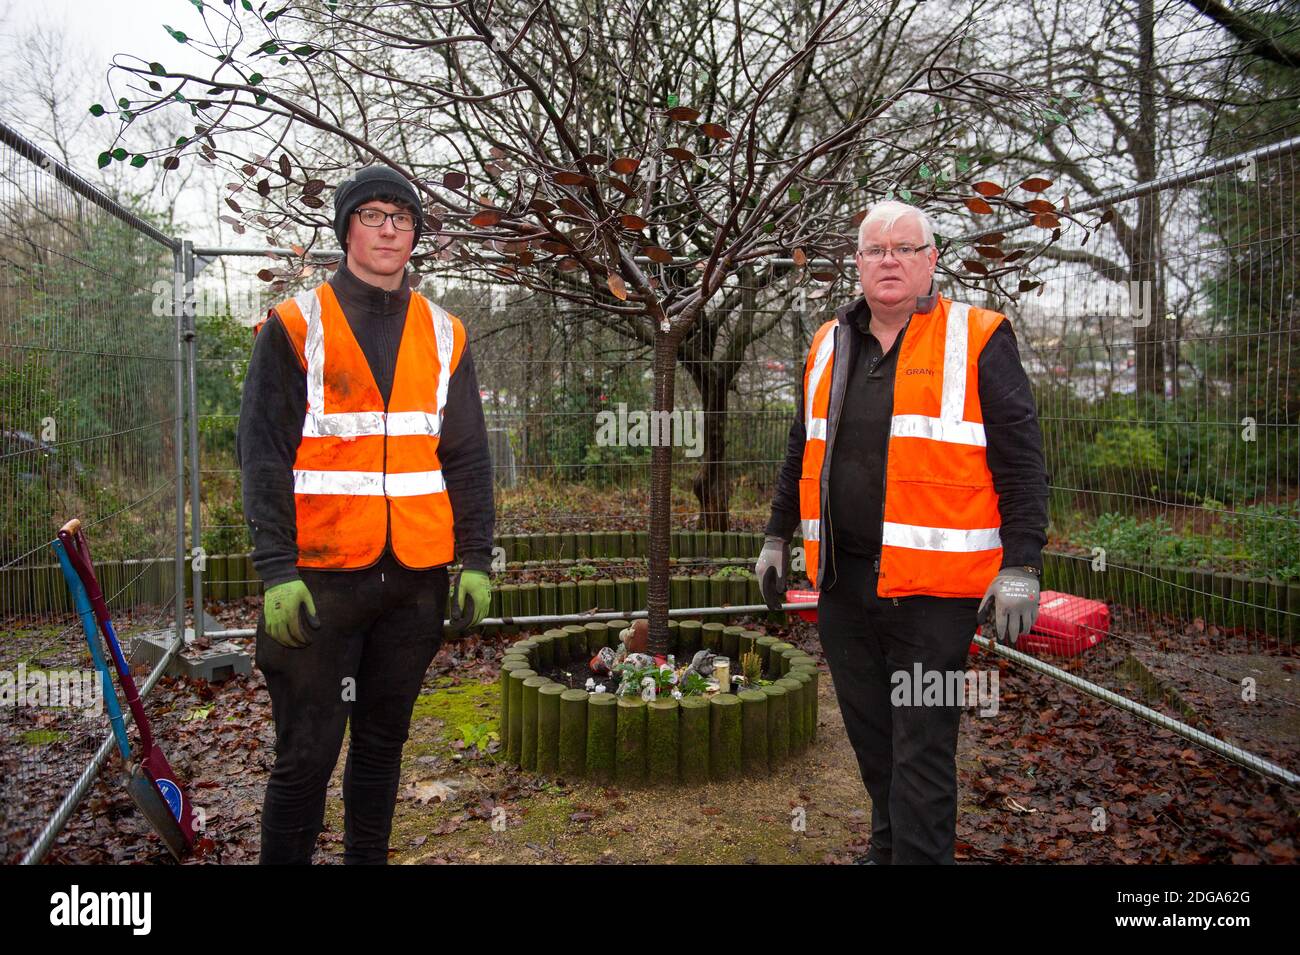 Glasgow, Scotland, UK. 8 December 2020. Pictured: (left) Reece Dixon - Health & Safety Lead, and (right) Grant Fitzimmons) CEO of Grant Fitzsimmons & Son Steel Fabricators. SiMBA Charity's Tree Of Tranquility and their ornate bench has been severely vandalised and set fire by vandals leaving their cigarette lighter behind. Distraught and bereaved Parents, Kat and Fraser made the horrific discovery as they visited SiMBA's memorial garden. Credit Colin Fisher/Alamy Live News. Stock Photo